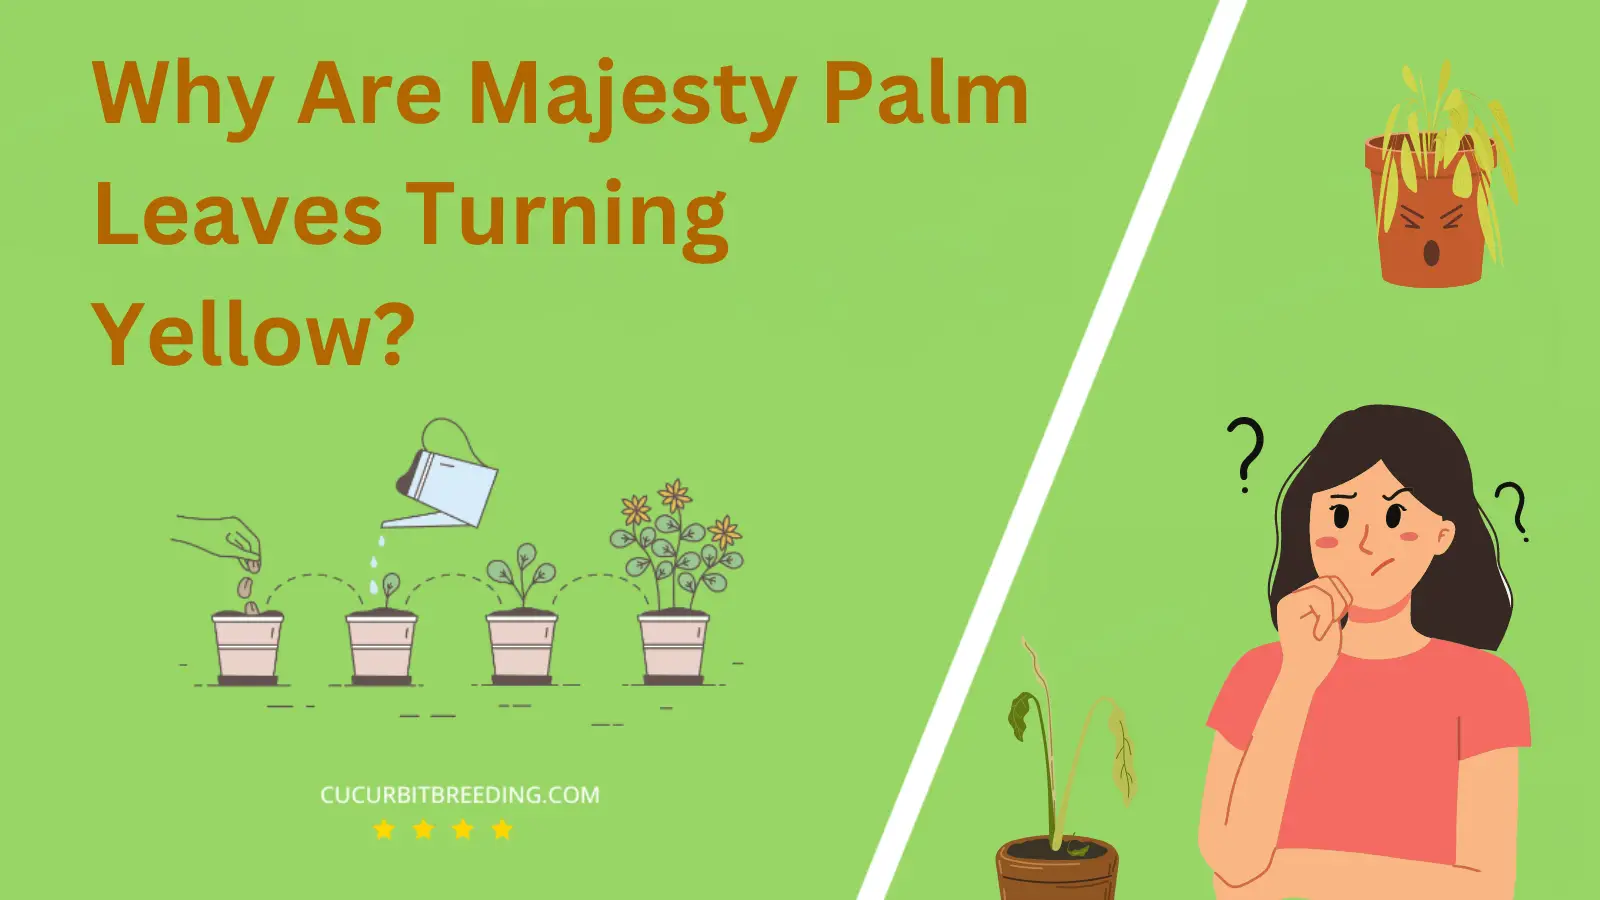 Why Are Majesty Palm Leaves Turning Yellow